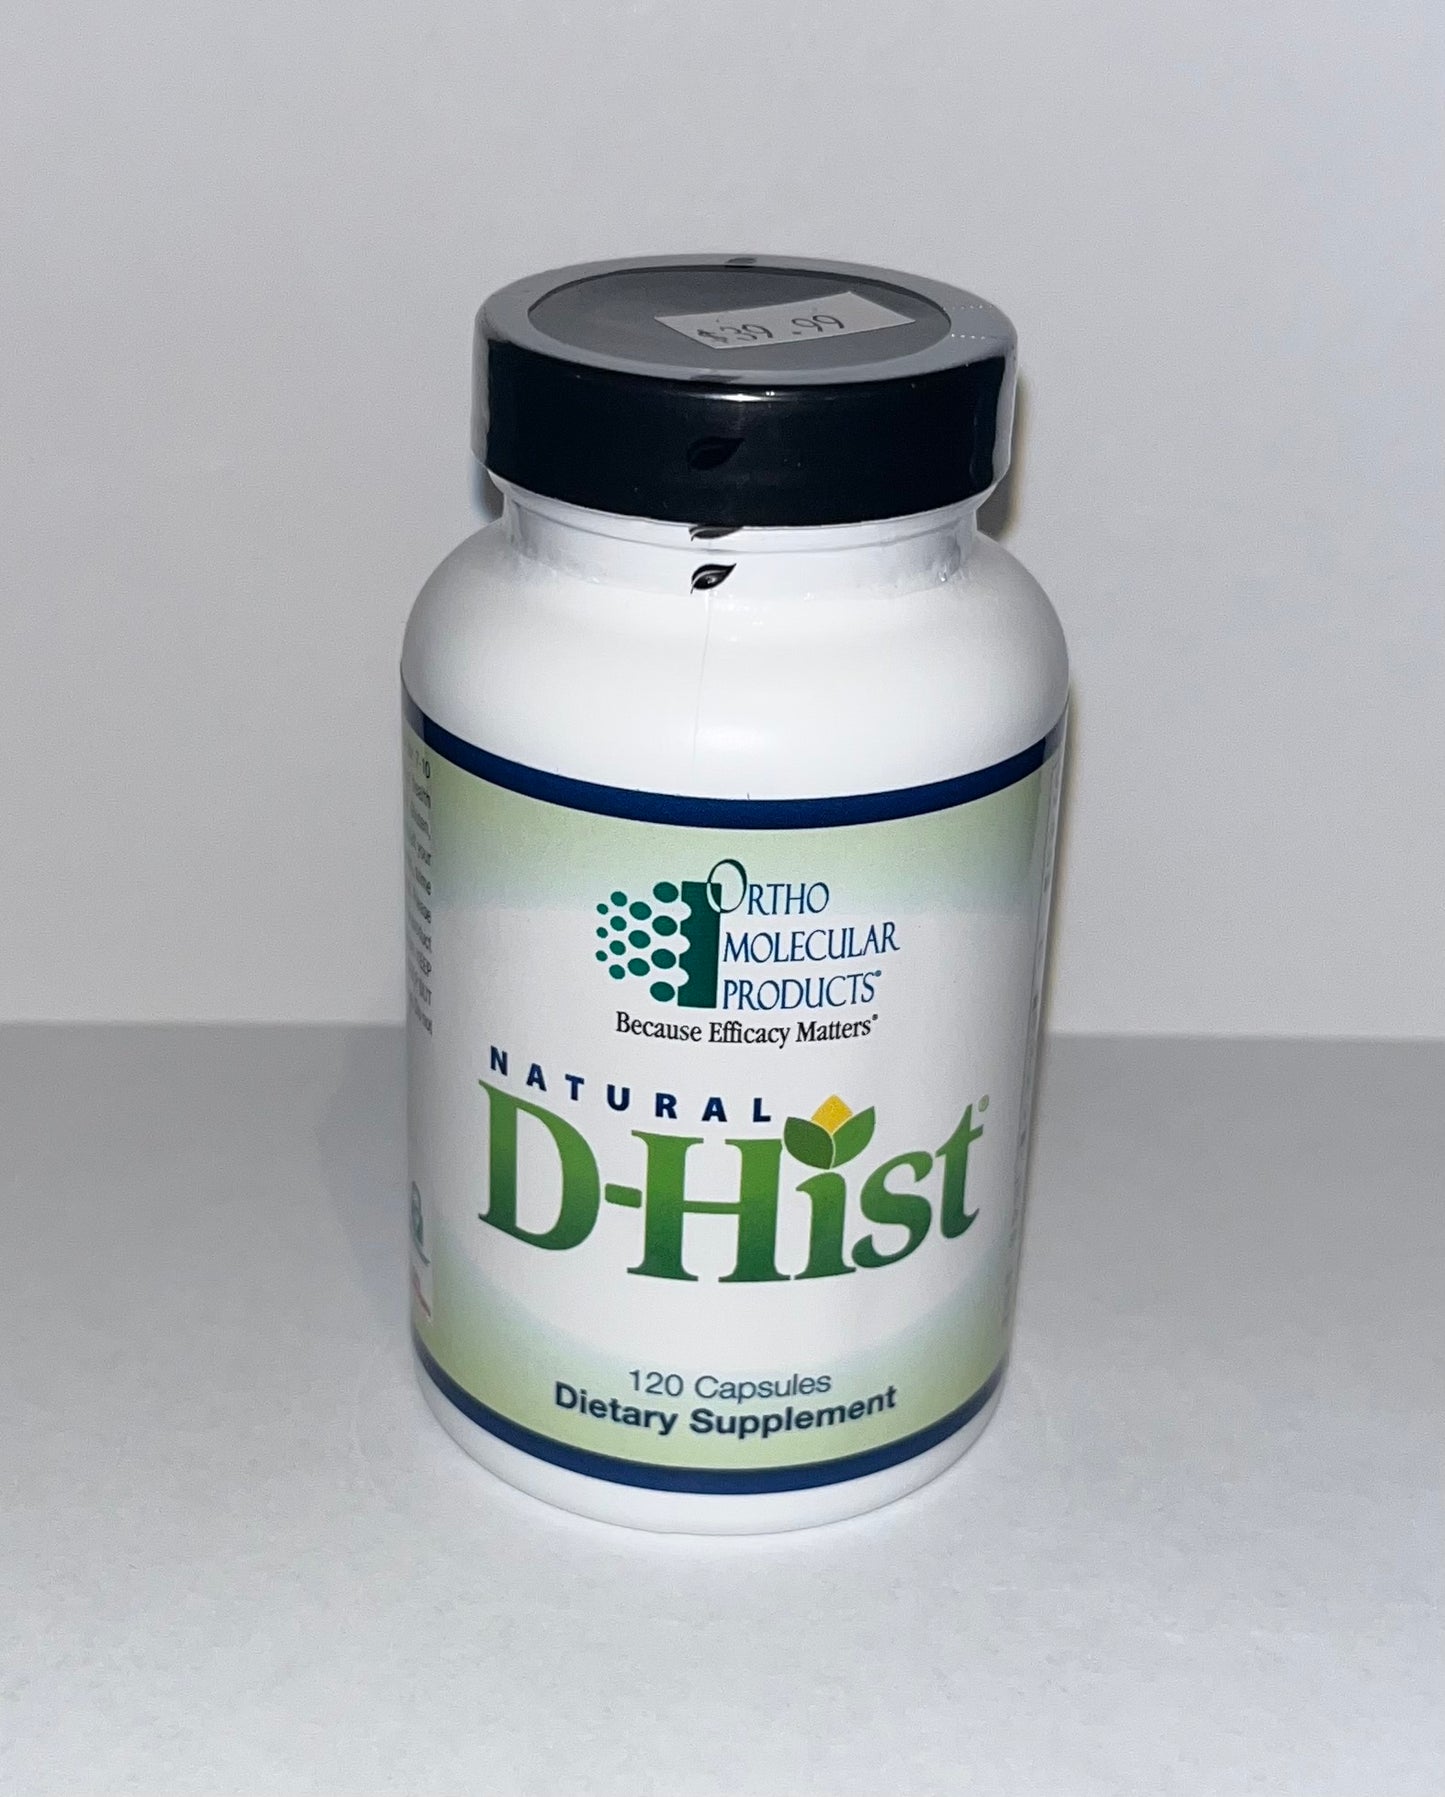 Natural DHist Dietary Supplement